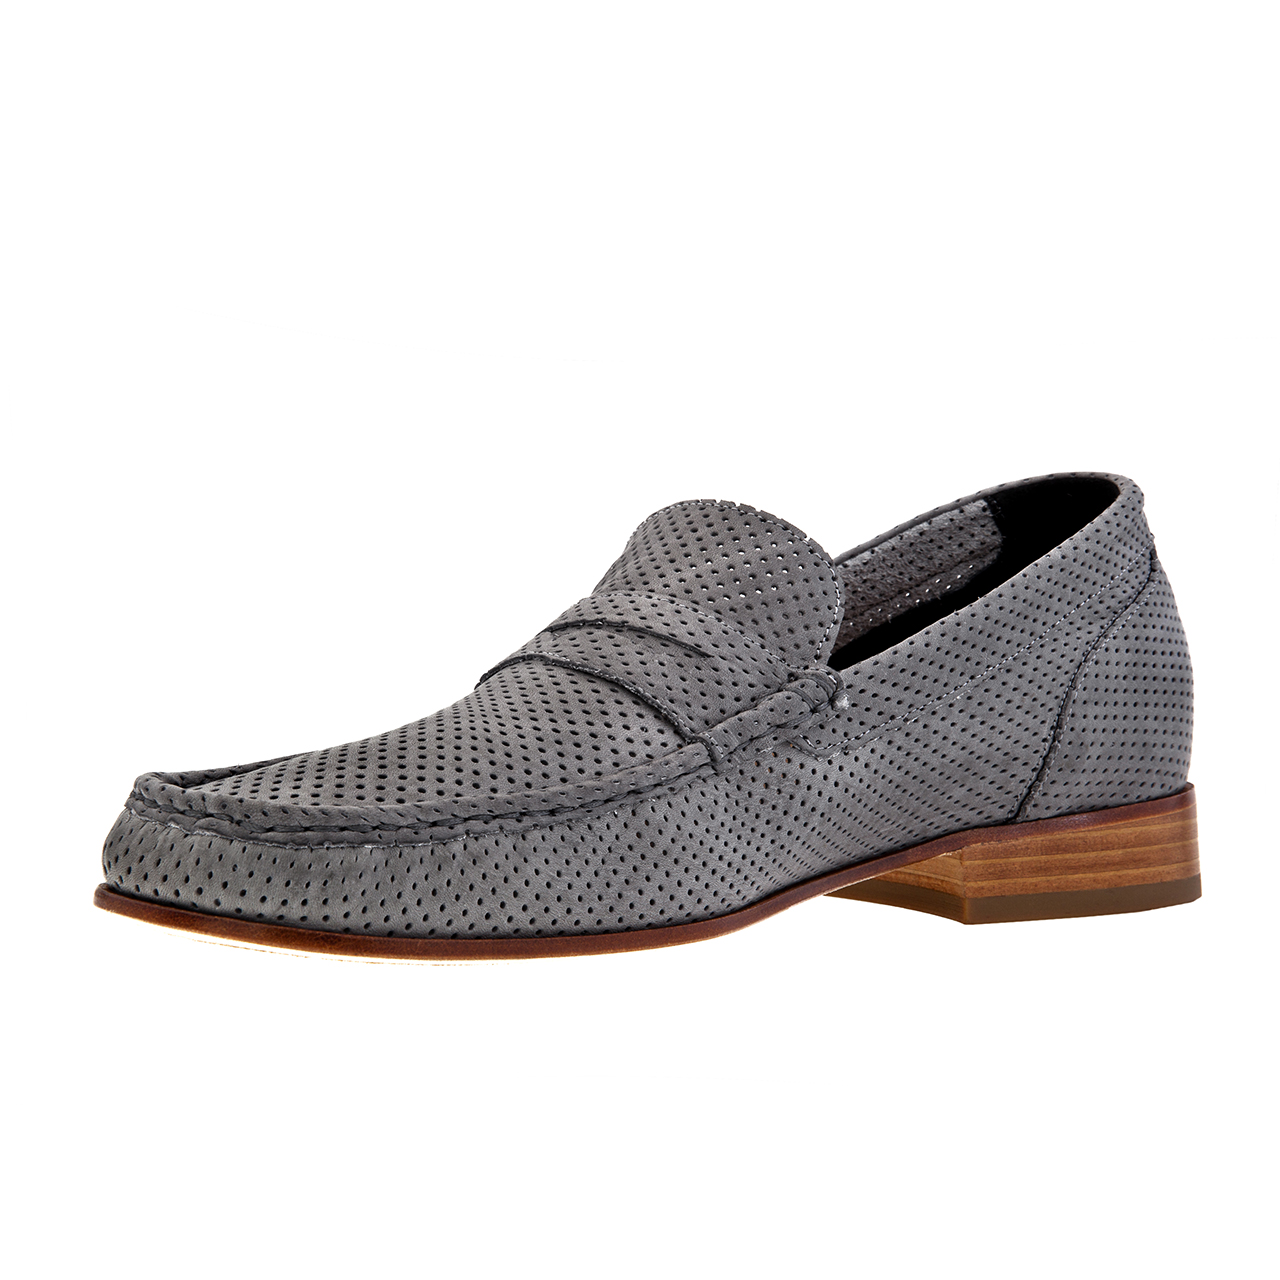 Recife - Loafers for short men | Guidomaggi